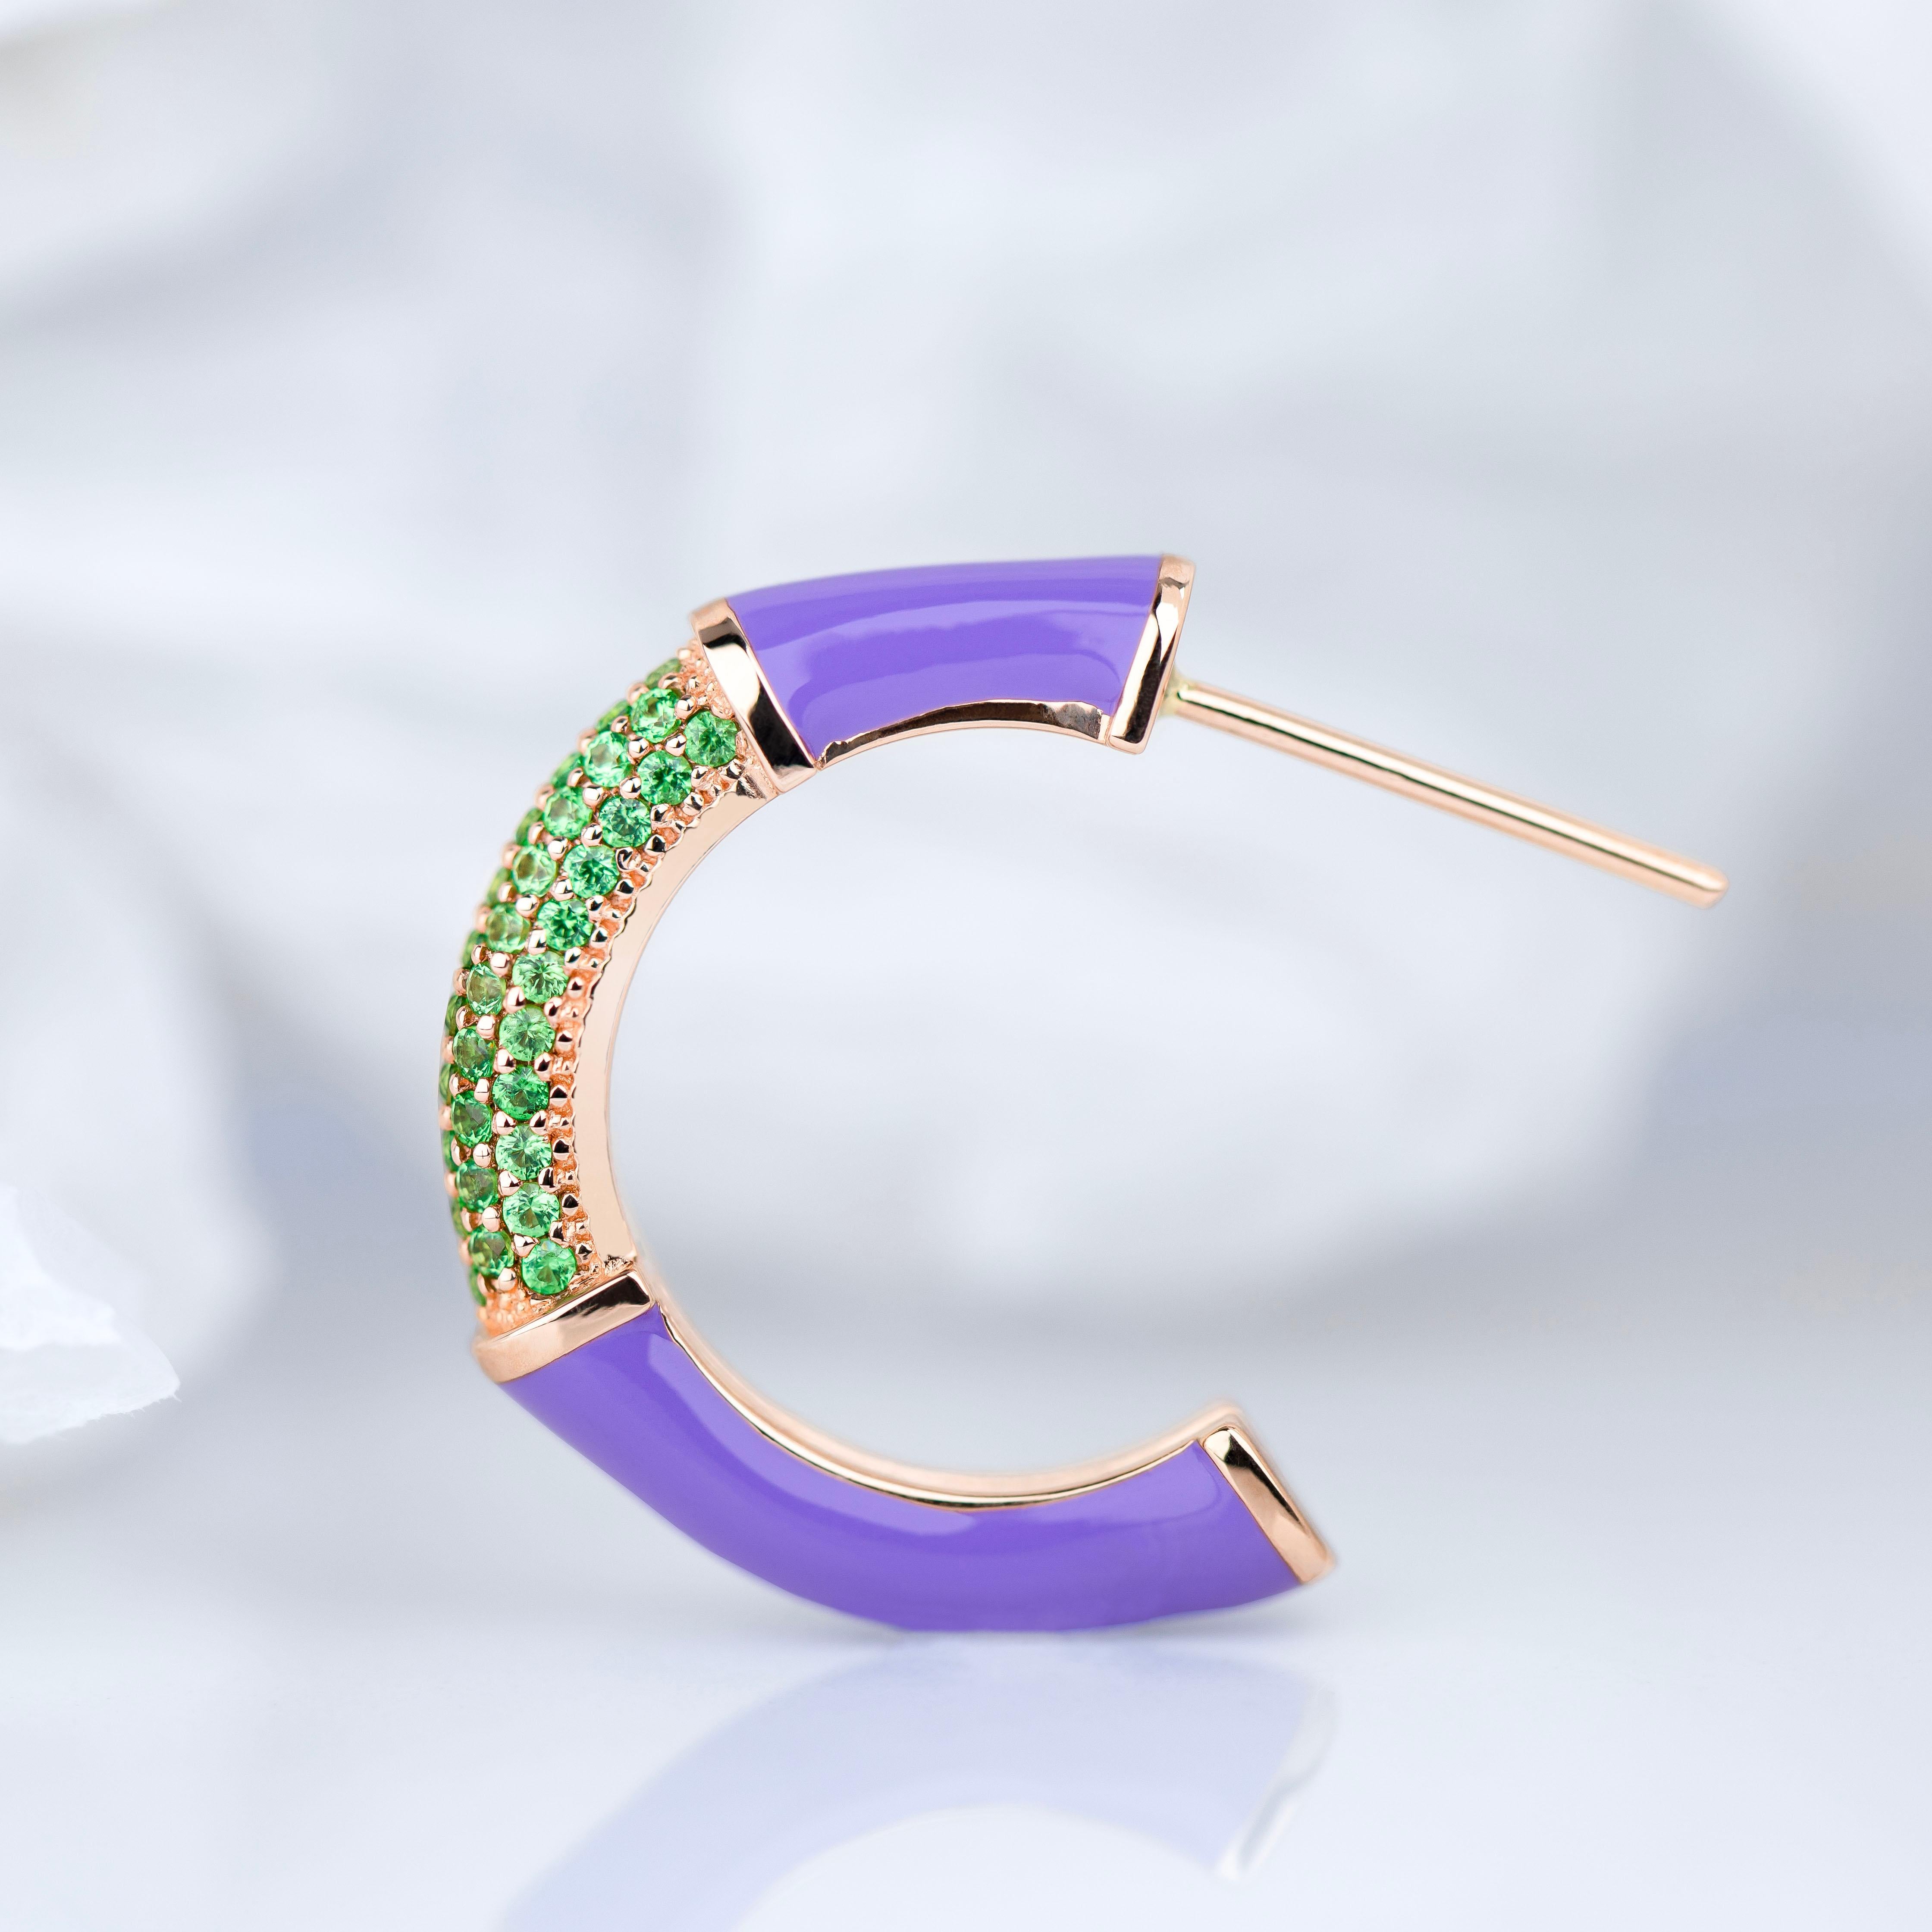 Art Deco Style Gold Earring with Tsavorite Stone, Bumble Colors Earring
This ring was made with quality materials and excellent handwork. I guarantee the quality assurance of my handwork and materials. It is vital for me that you are totally happy